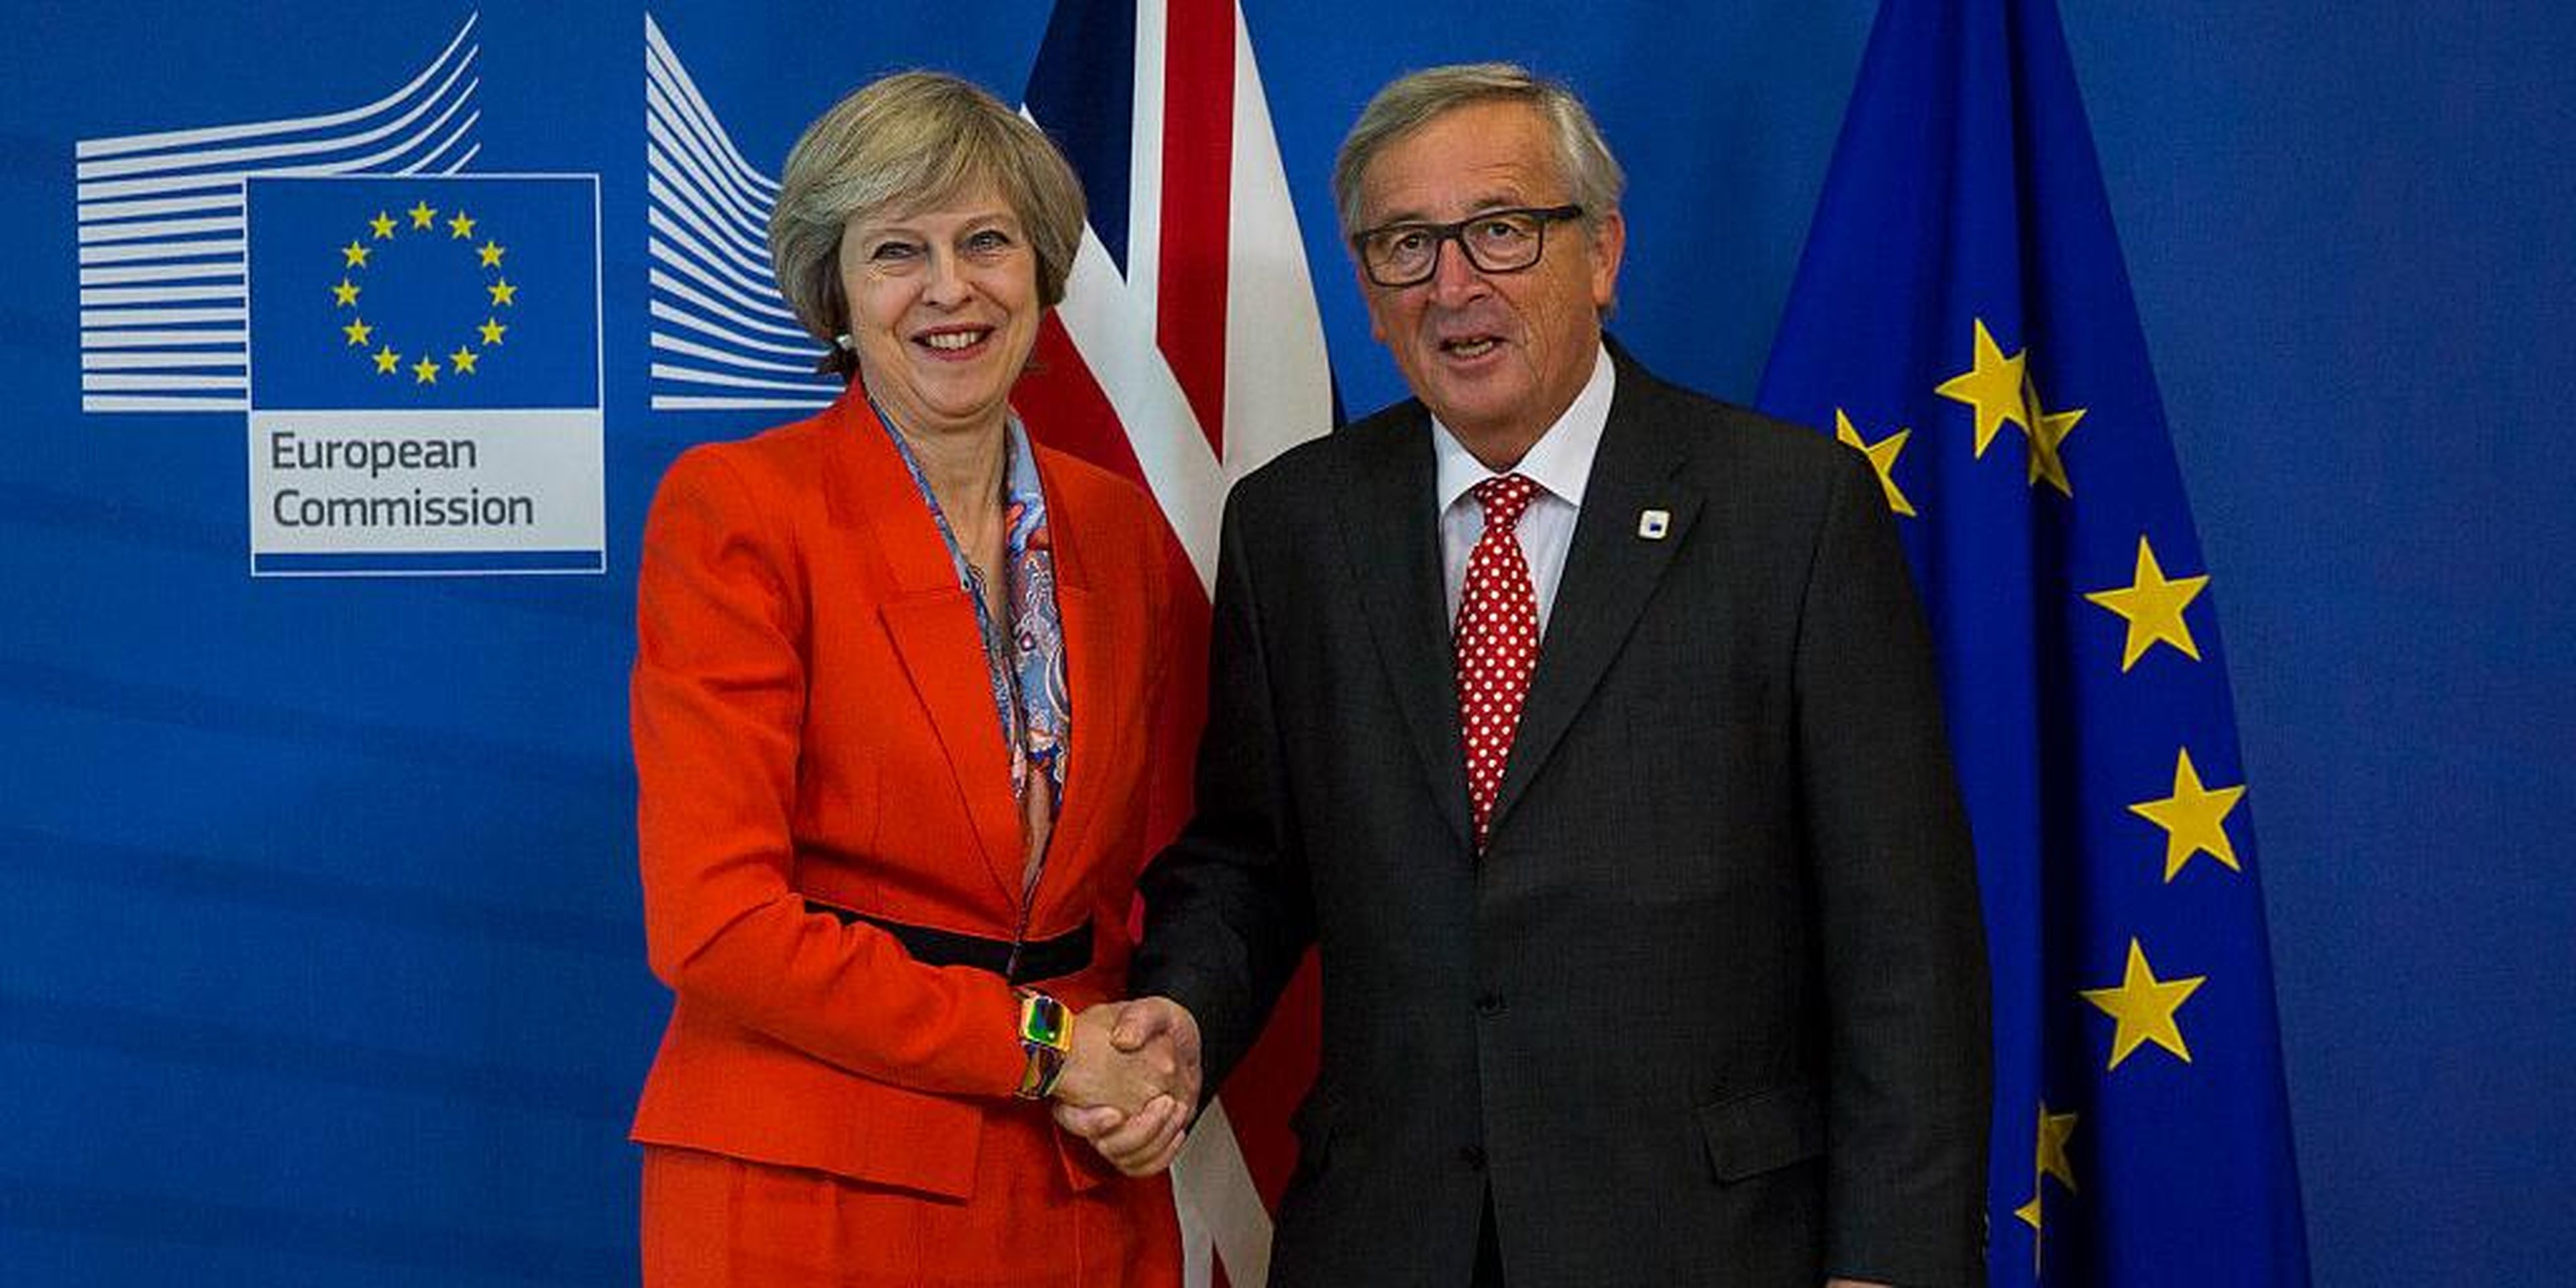 Theresa May has a greed a Brexit deal with EU leaders.